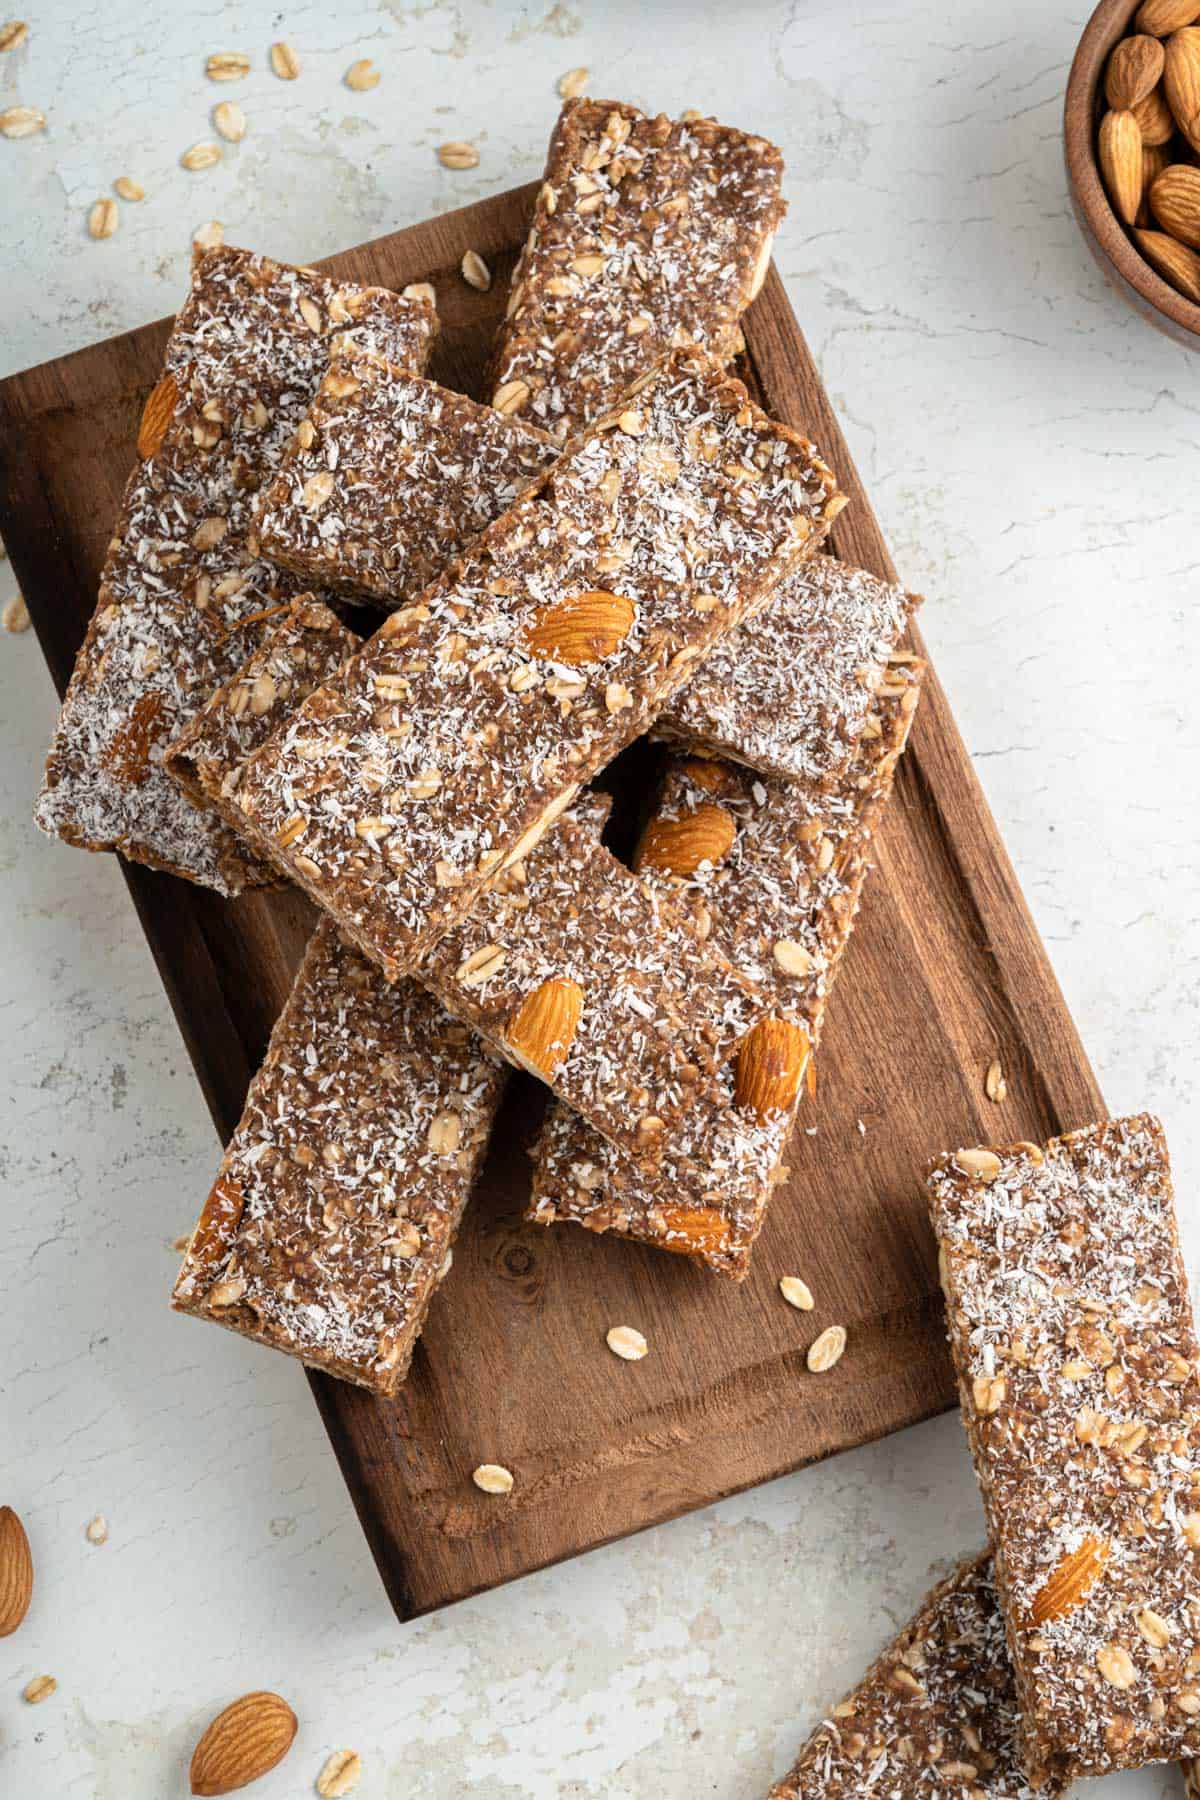 Chocolate oat bars on a wooden board sprinkled with nuts and coconut.